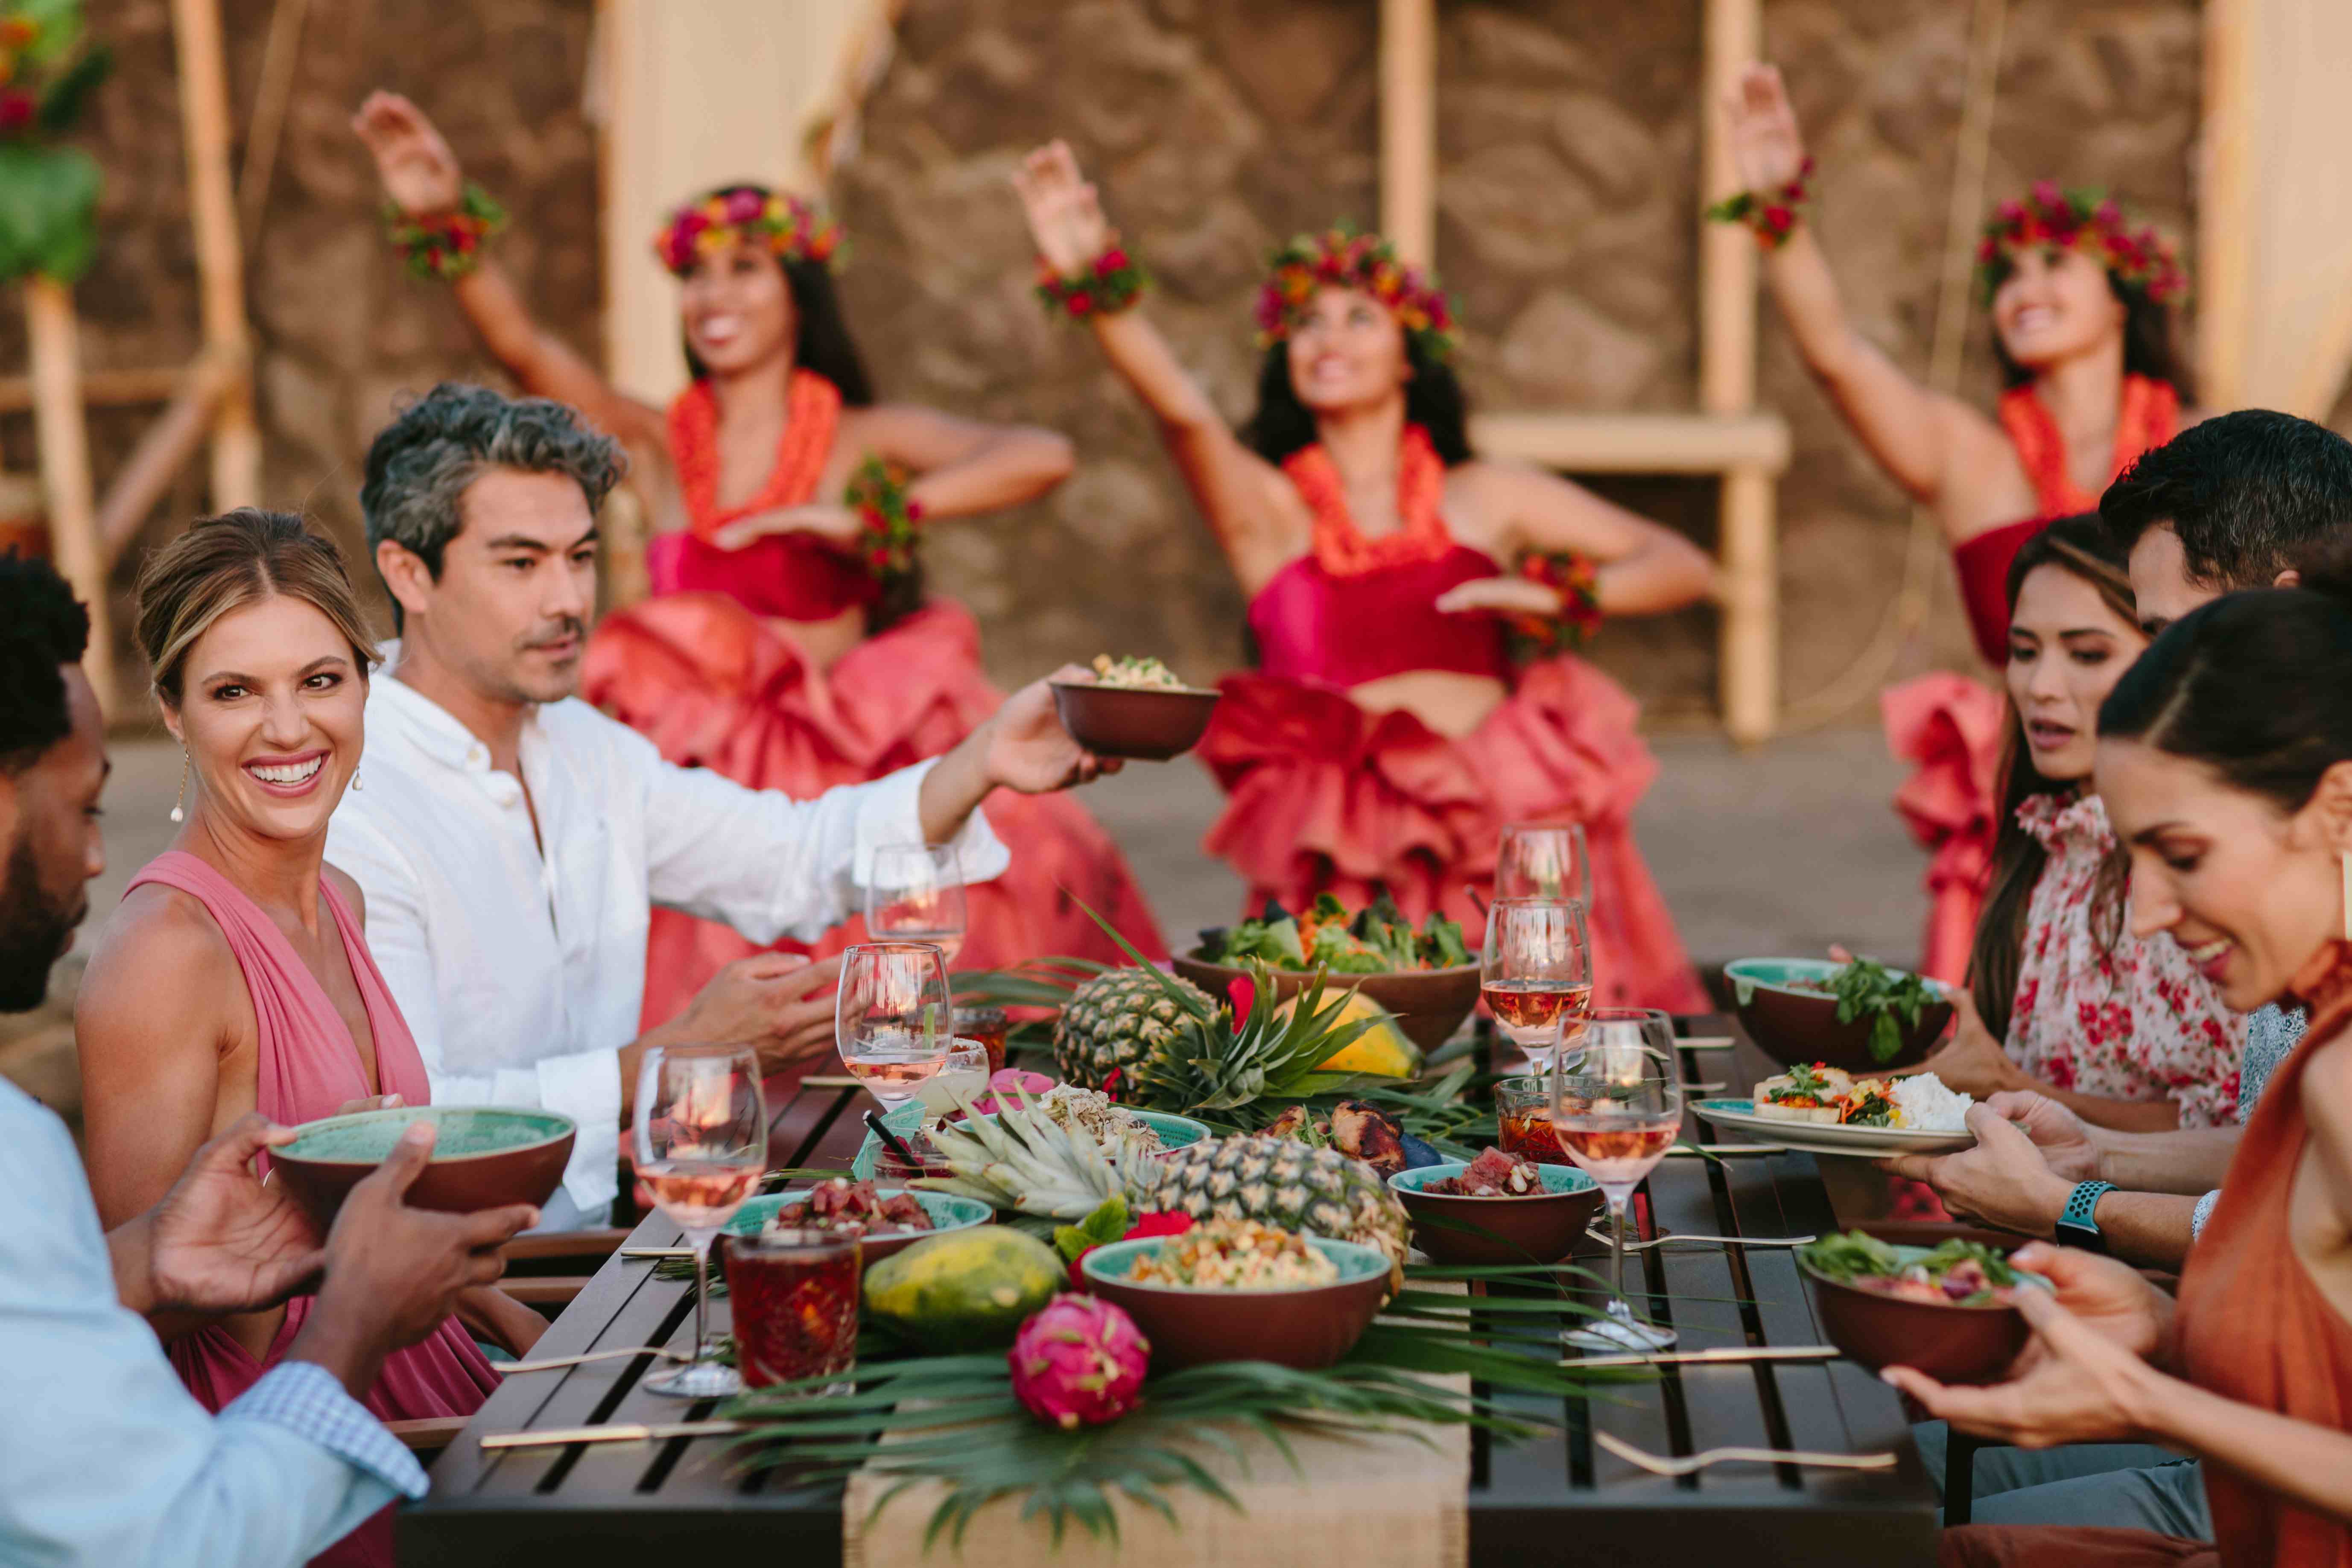 People eating at a table with hula dancers in the background